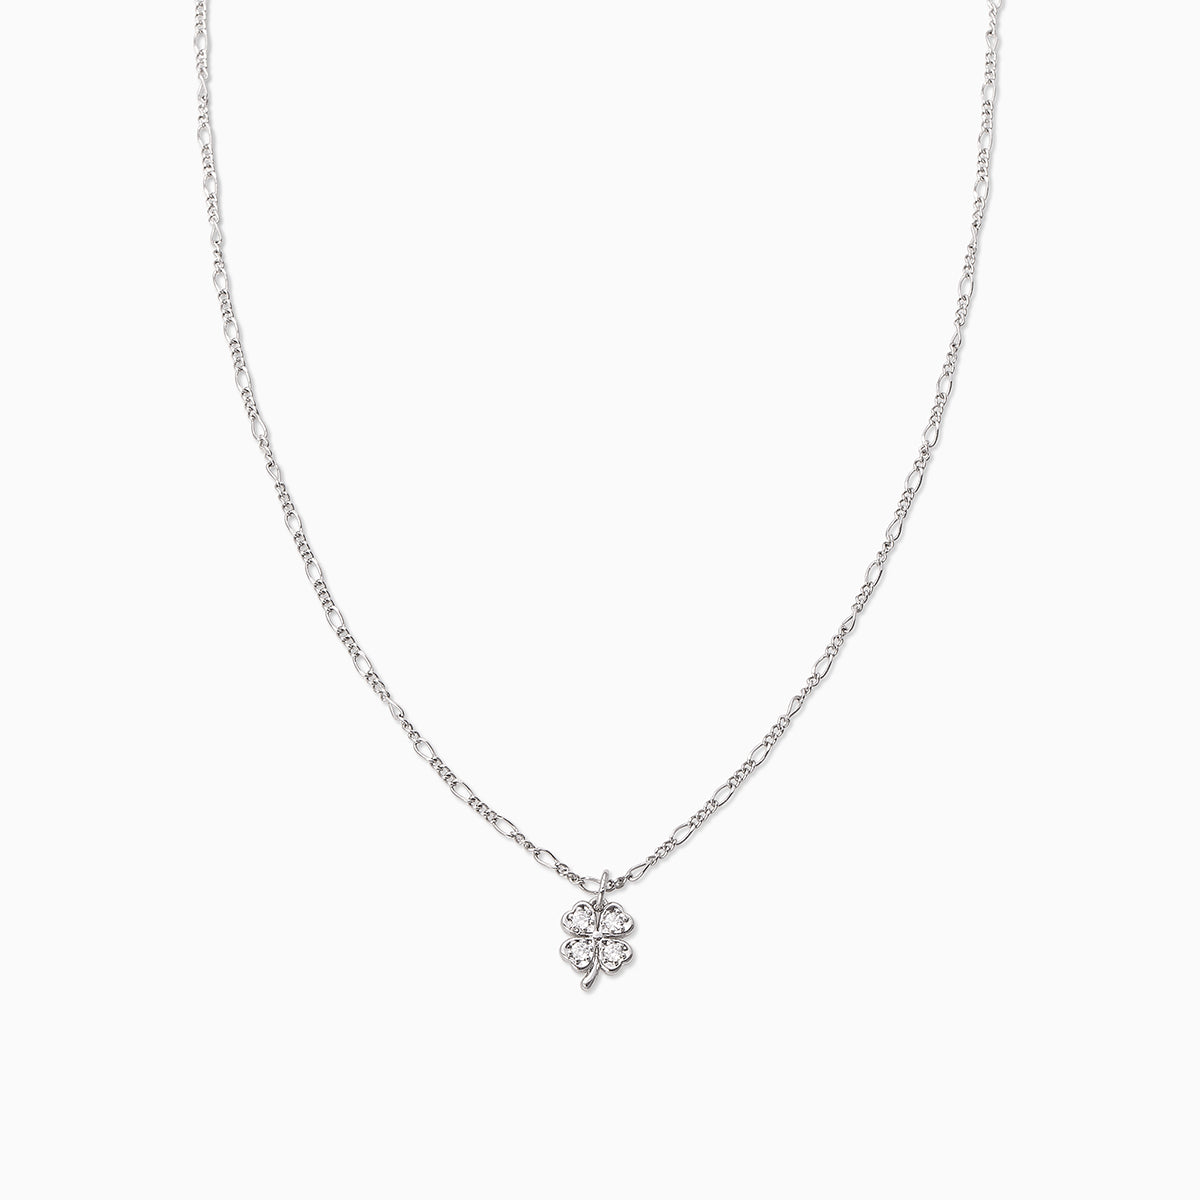 Four Leaf Clover Necklace | Silver | Product Image | Uncommon James